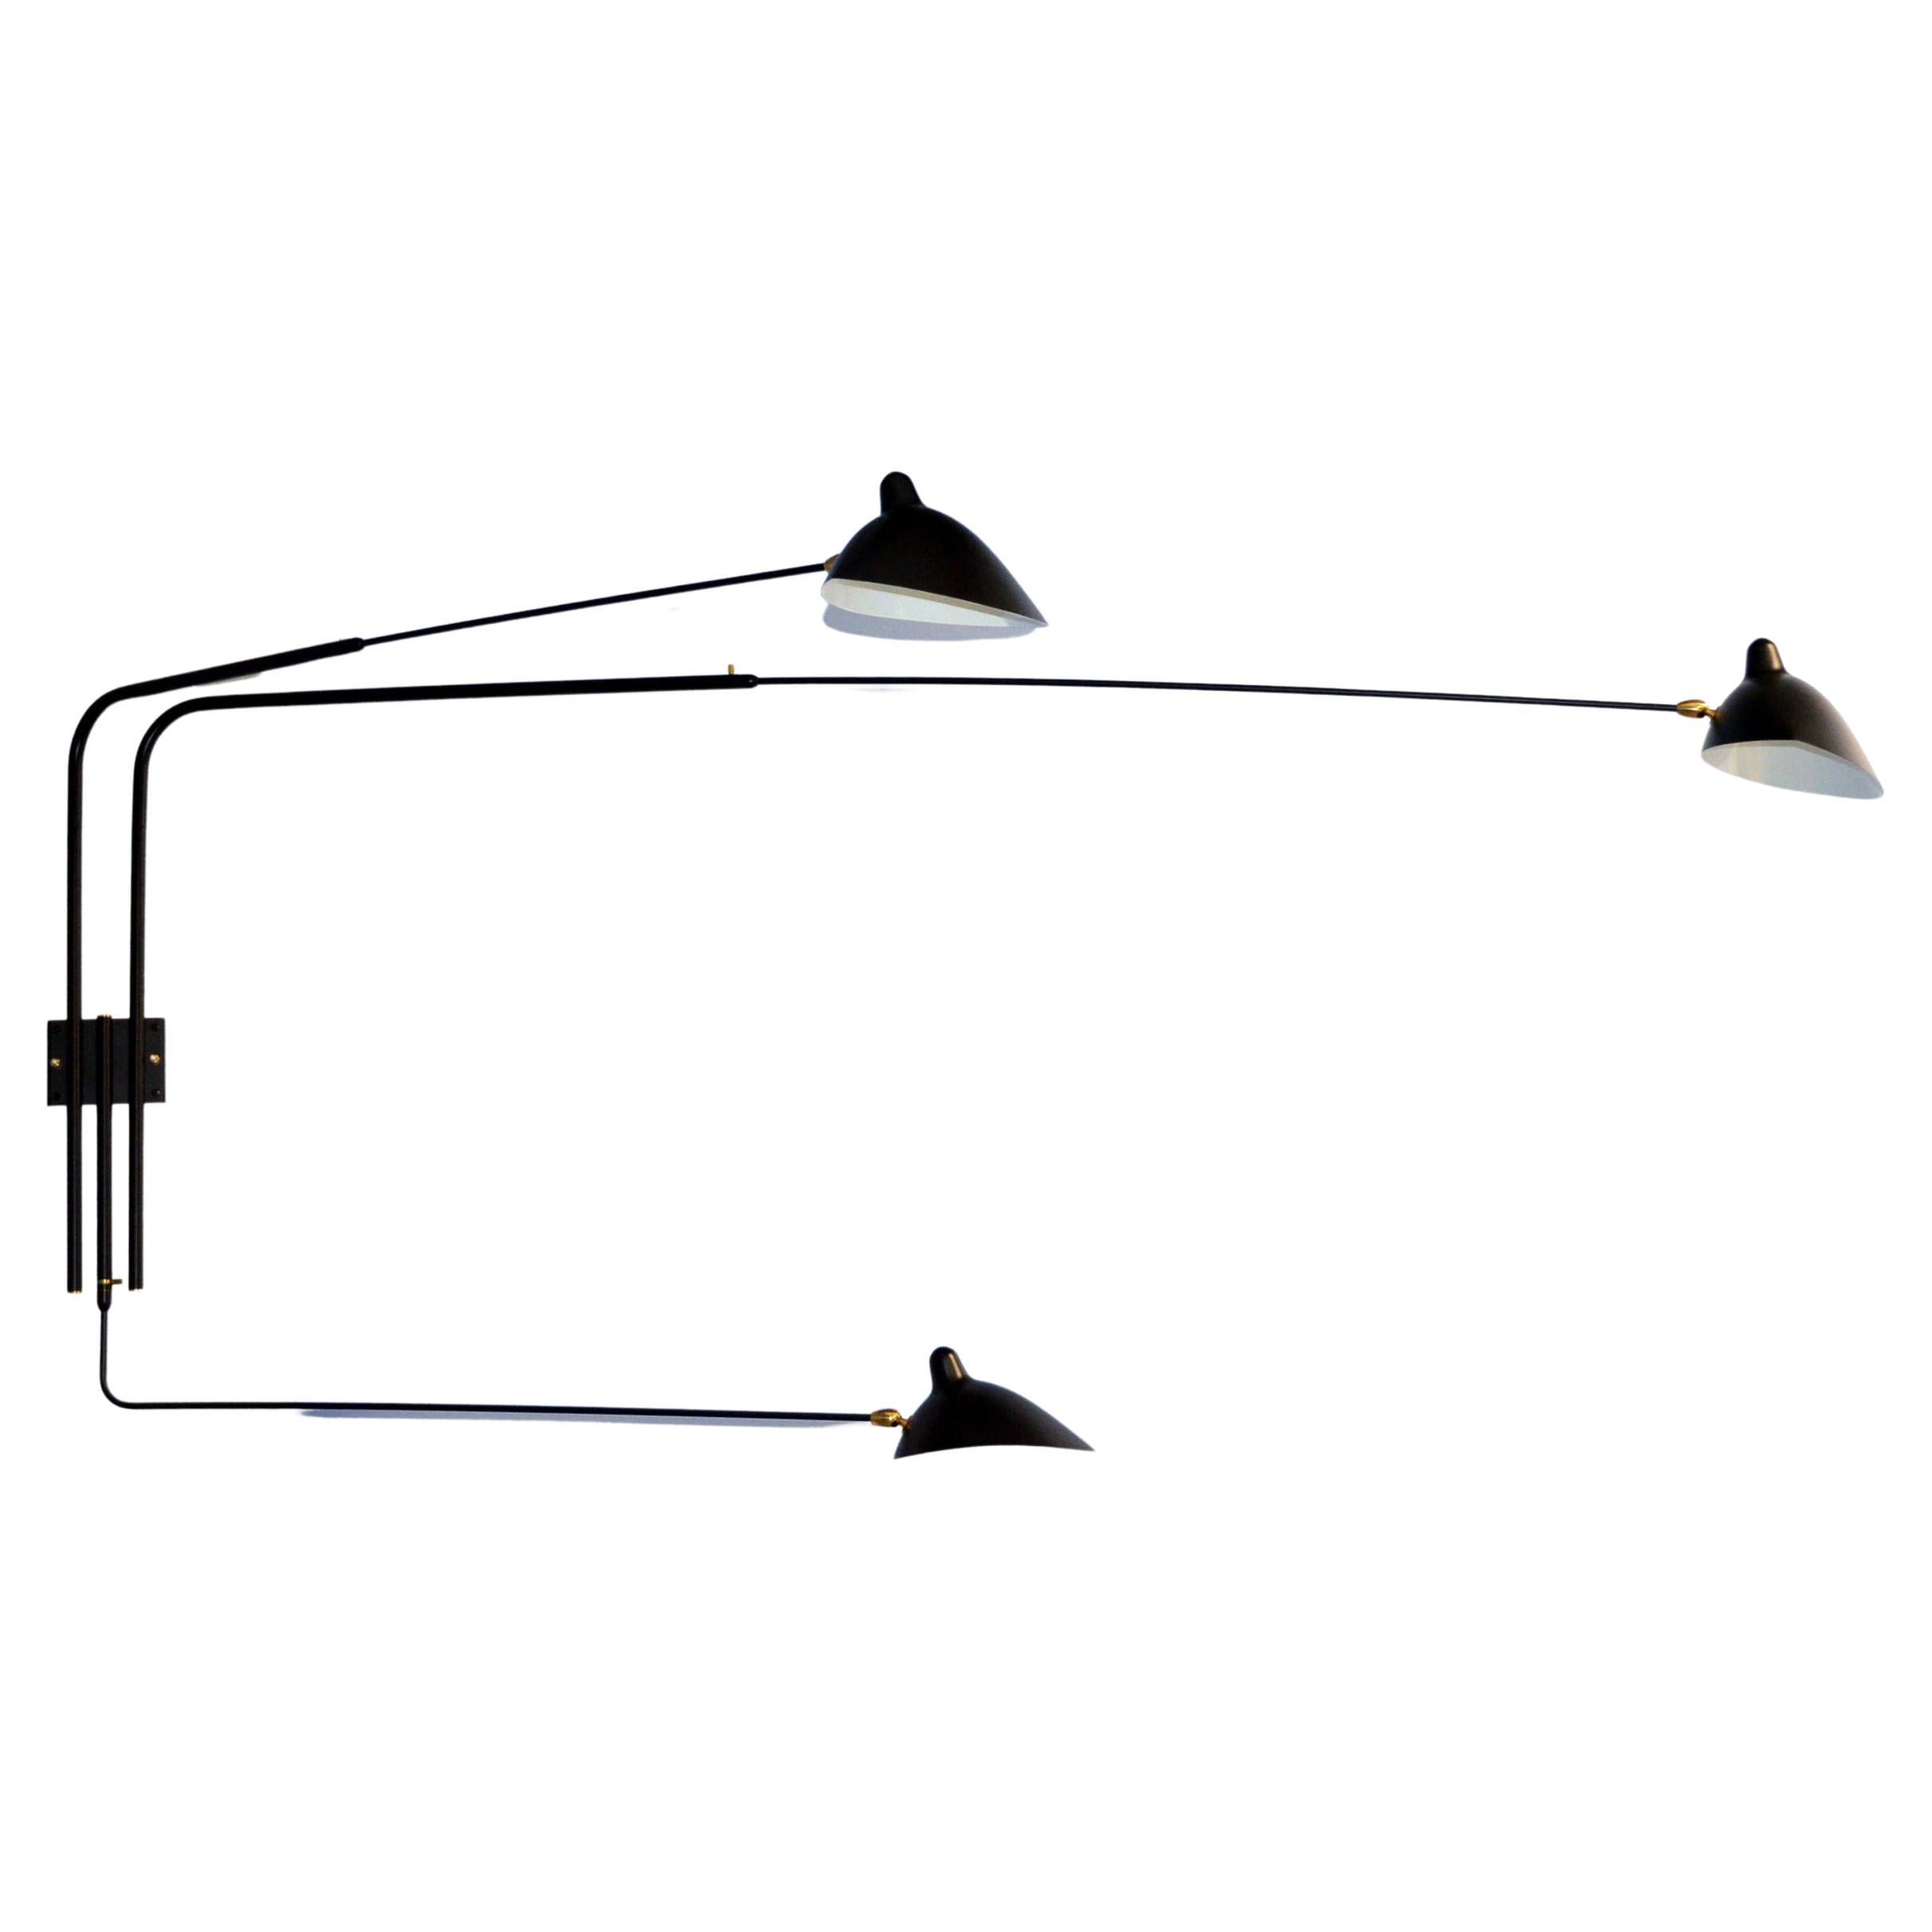 Serge Mouille - Rotating Sconce with 3 Arms in Black or White For Sale